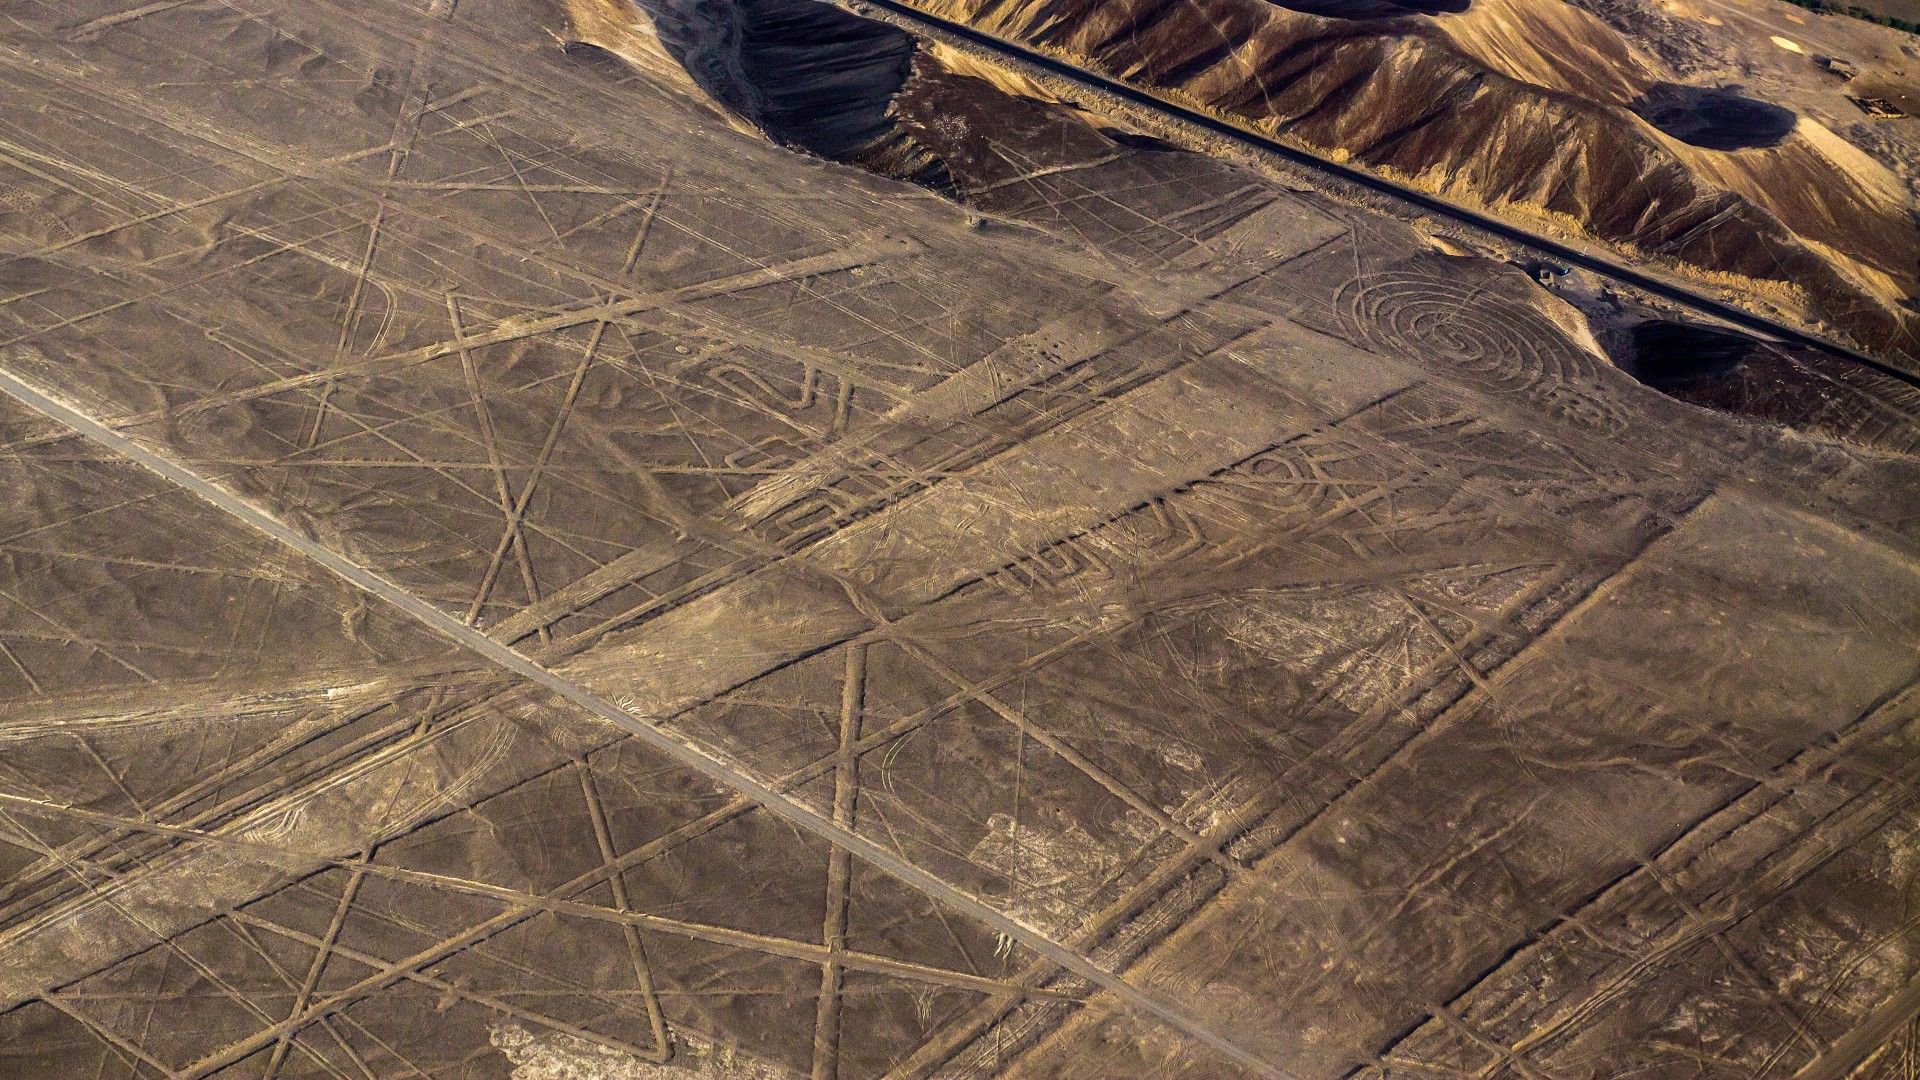 <p>                     There's still no consensus on why the Nazca Lines were created. Some experts think the drawings were part of a calendar or an ancient irrigation system. Paul Kosok, the late American professor of history and government, once called the geoglyphs "the largest astronomy book in the world," according to Smithsonian Magazine.                   </p>